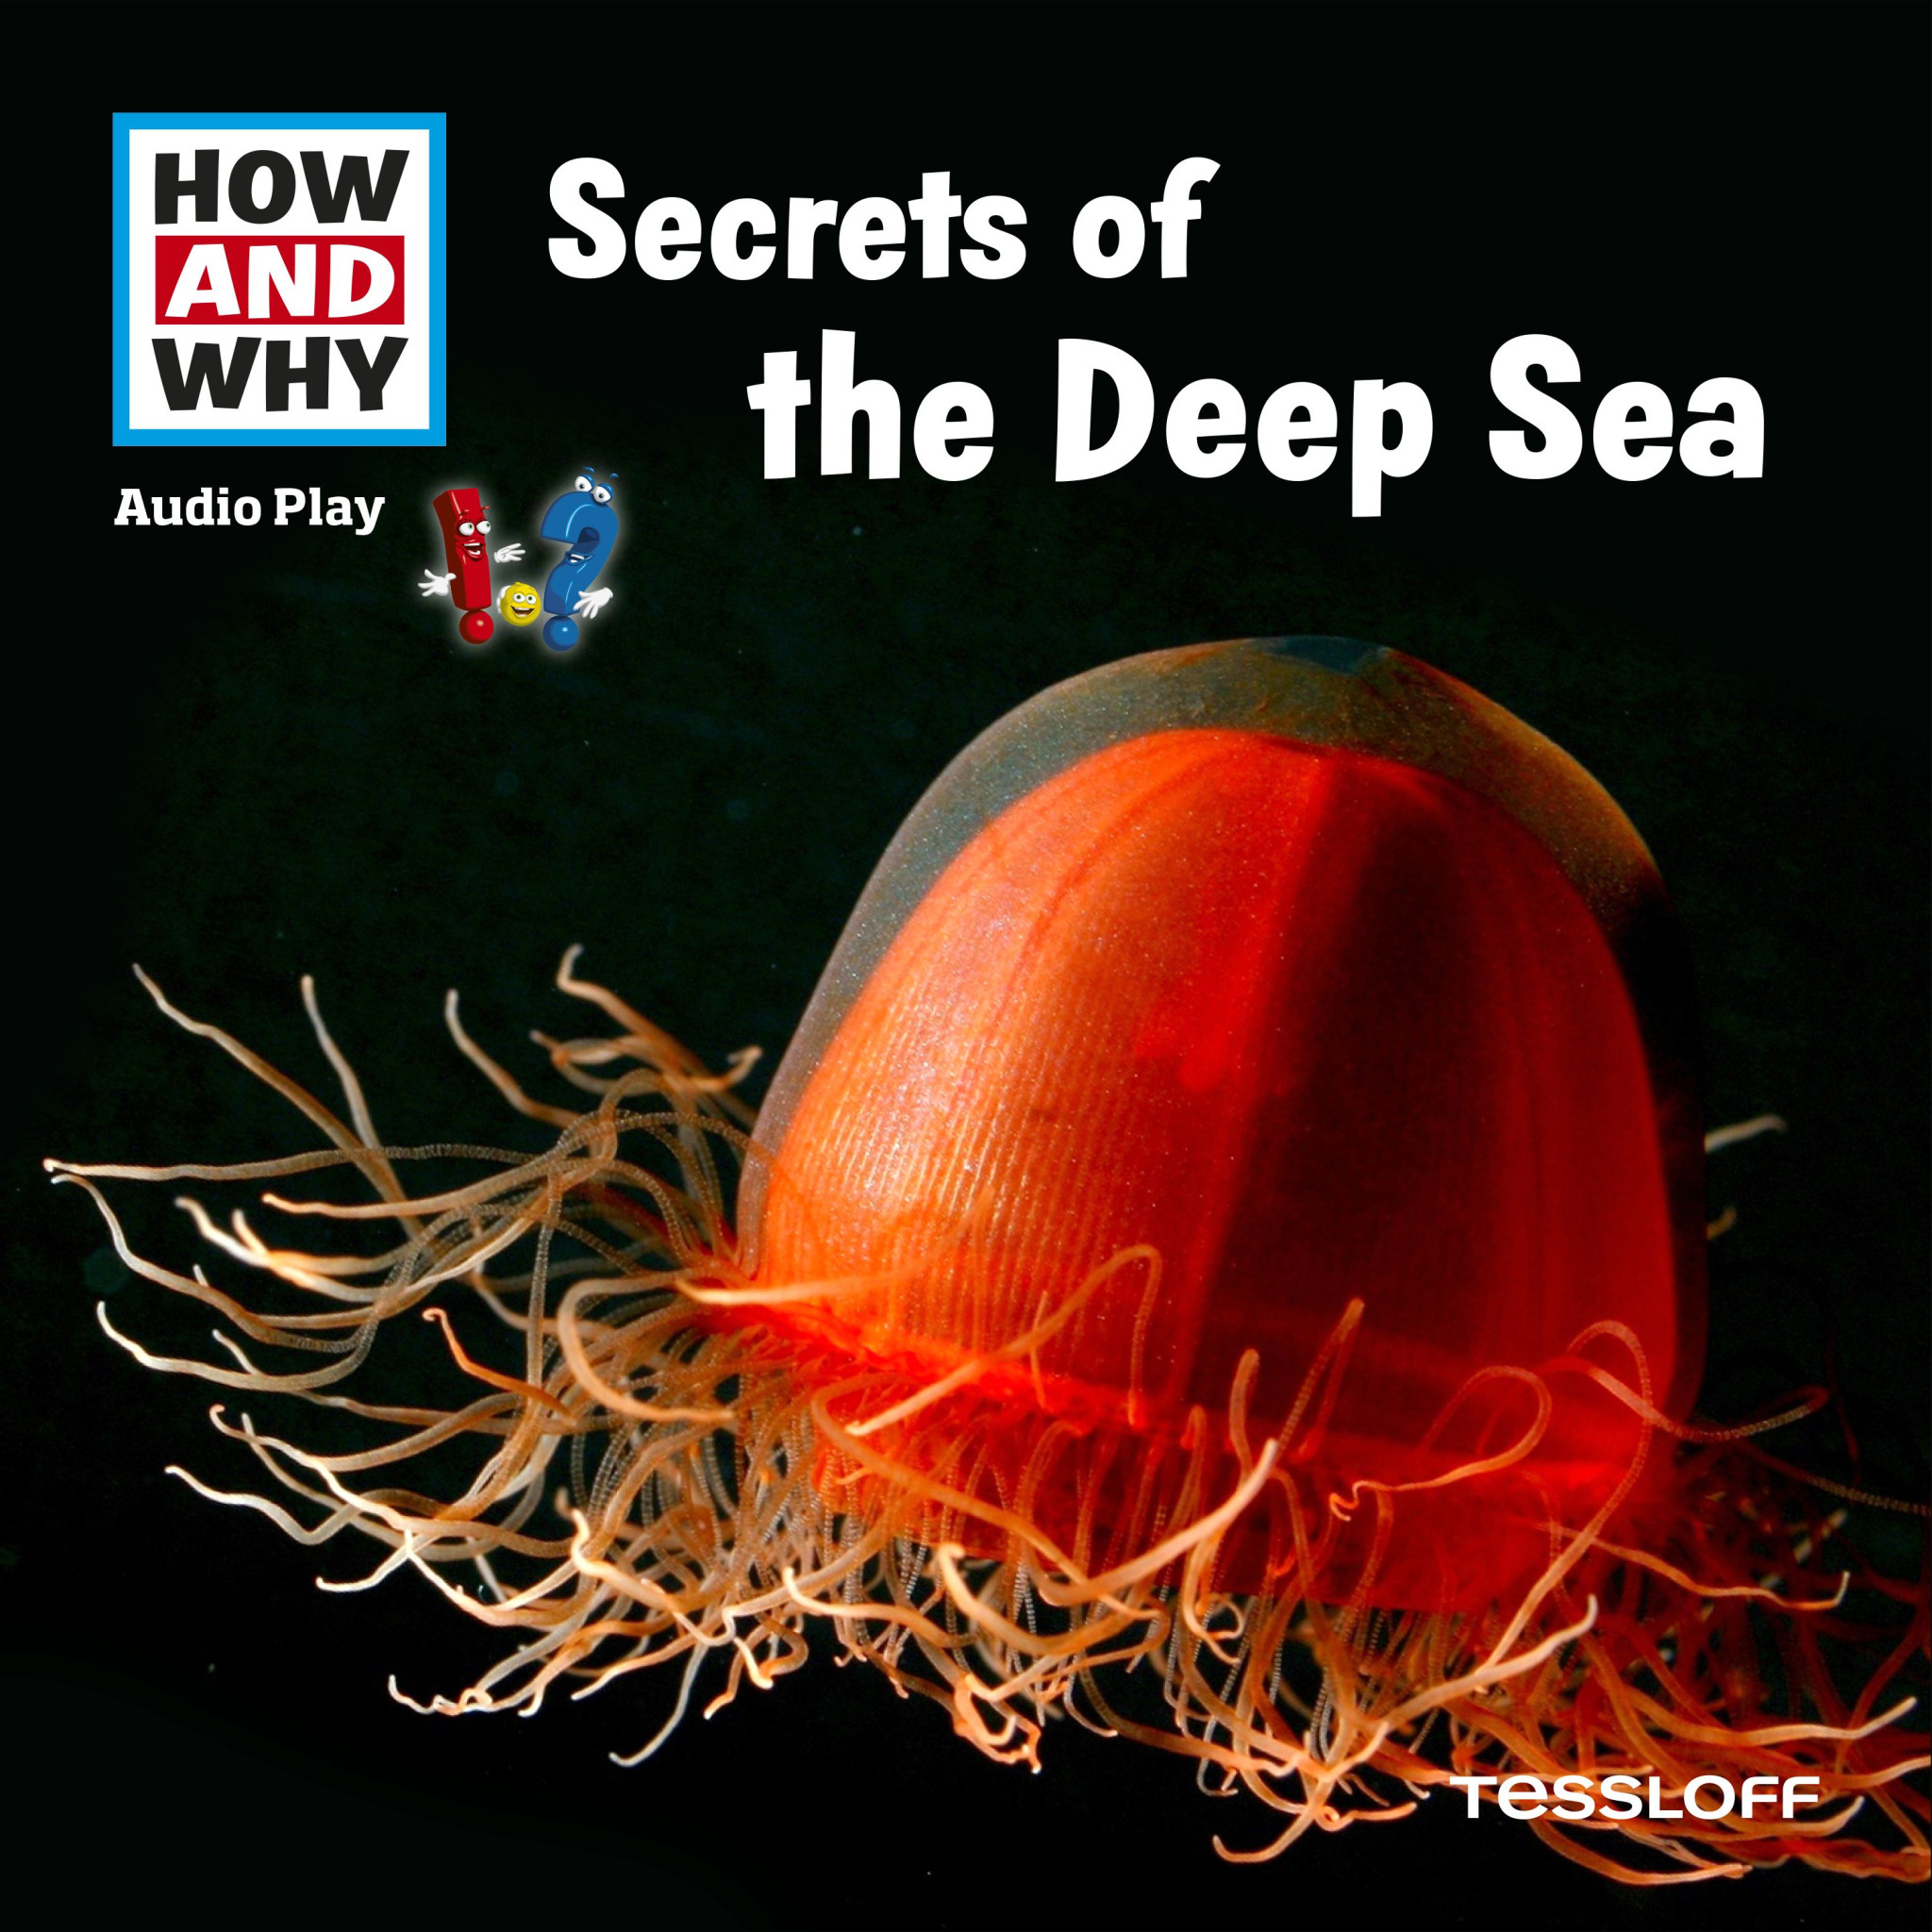 how and why - secrets of the deep sea